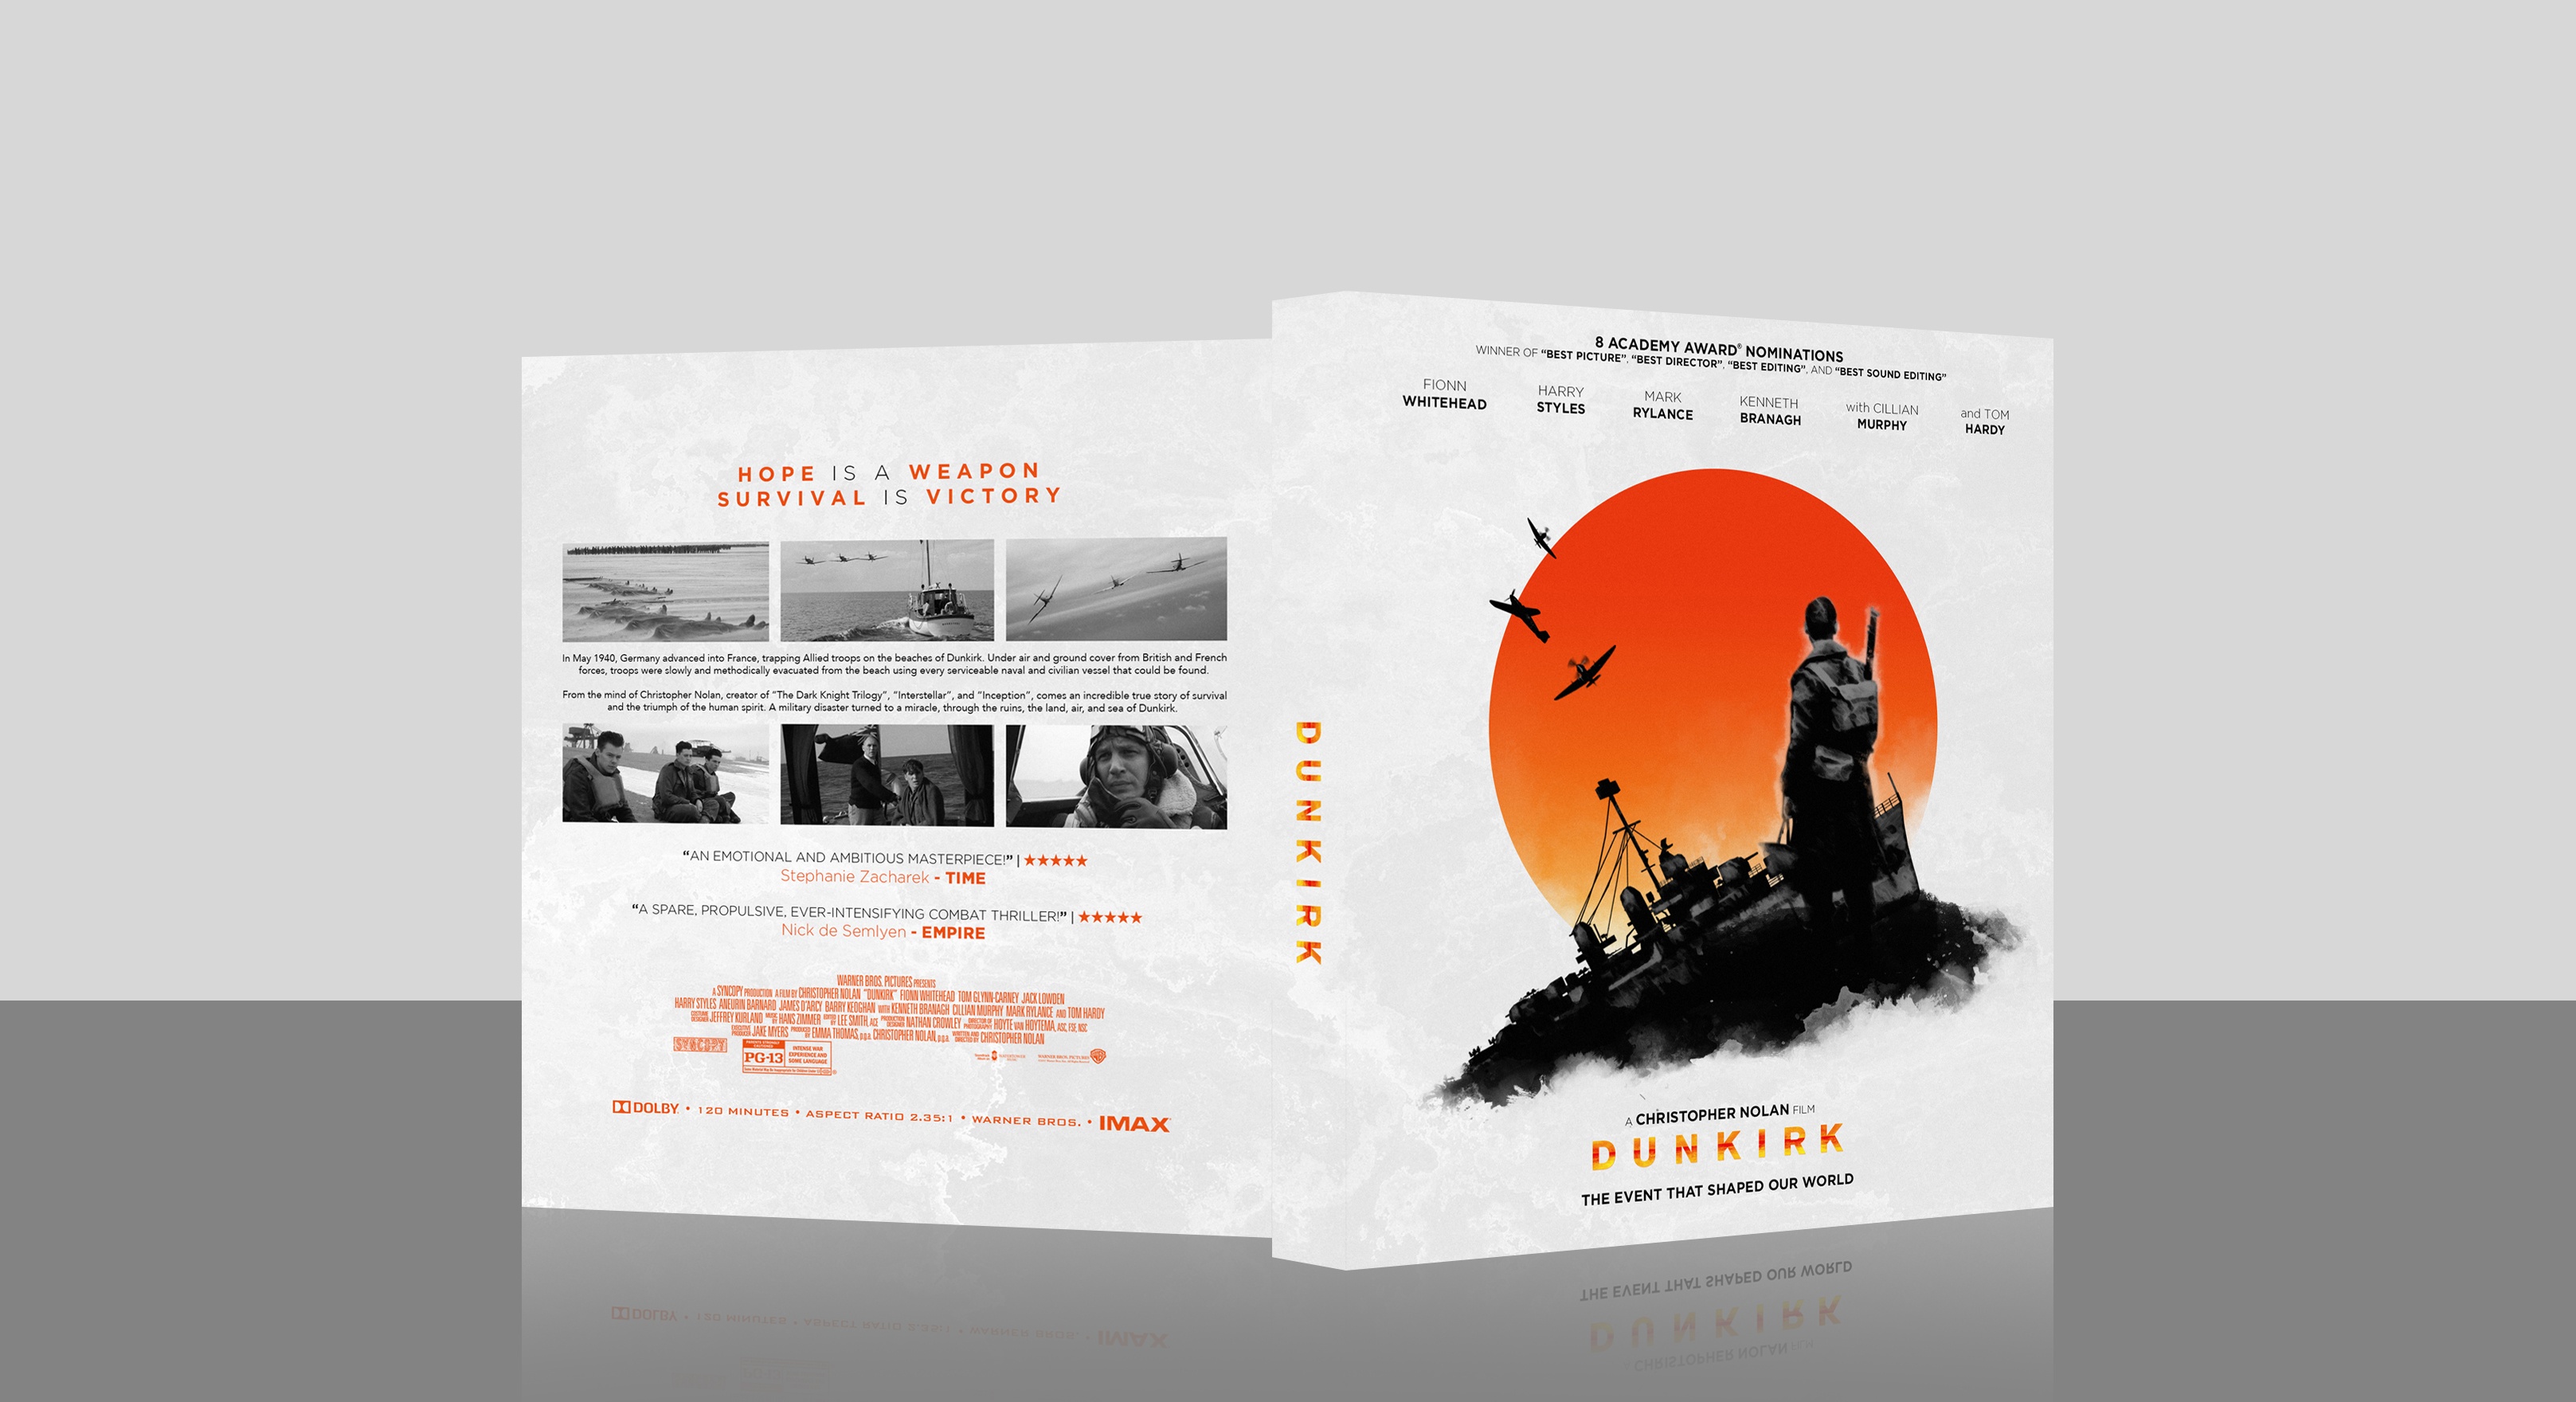 Dunkirk box cover